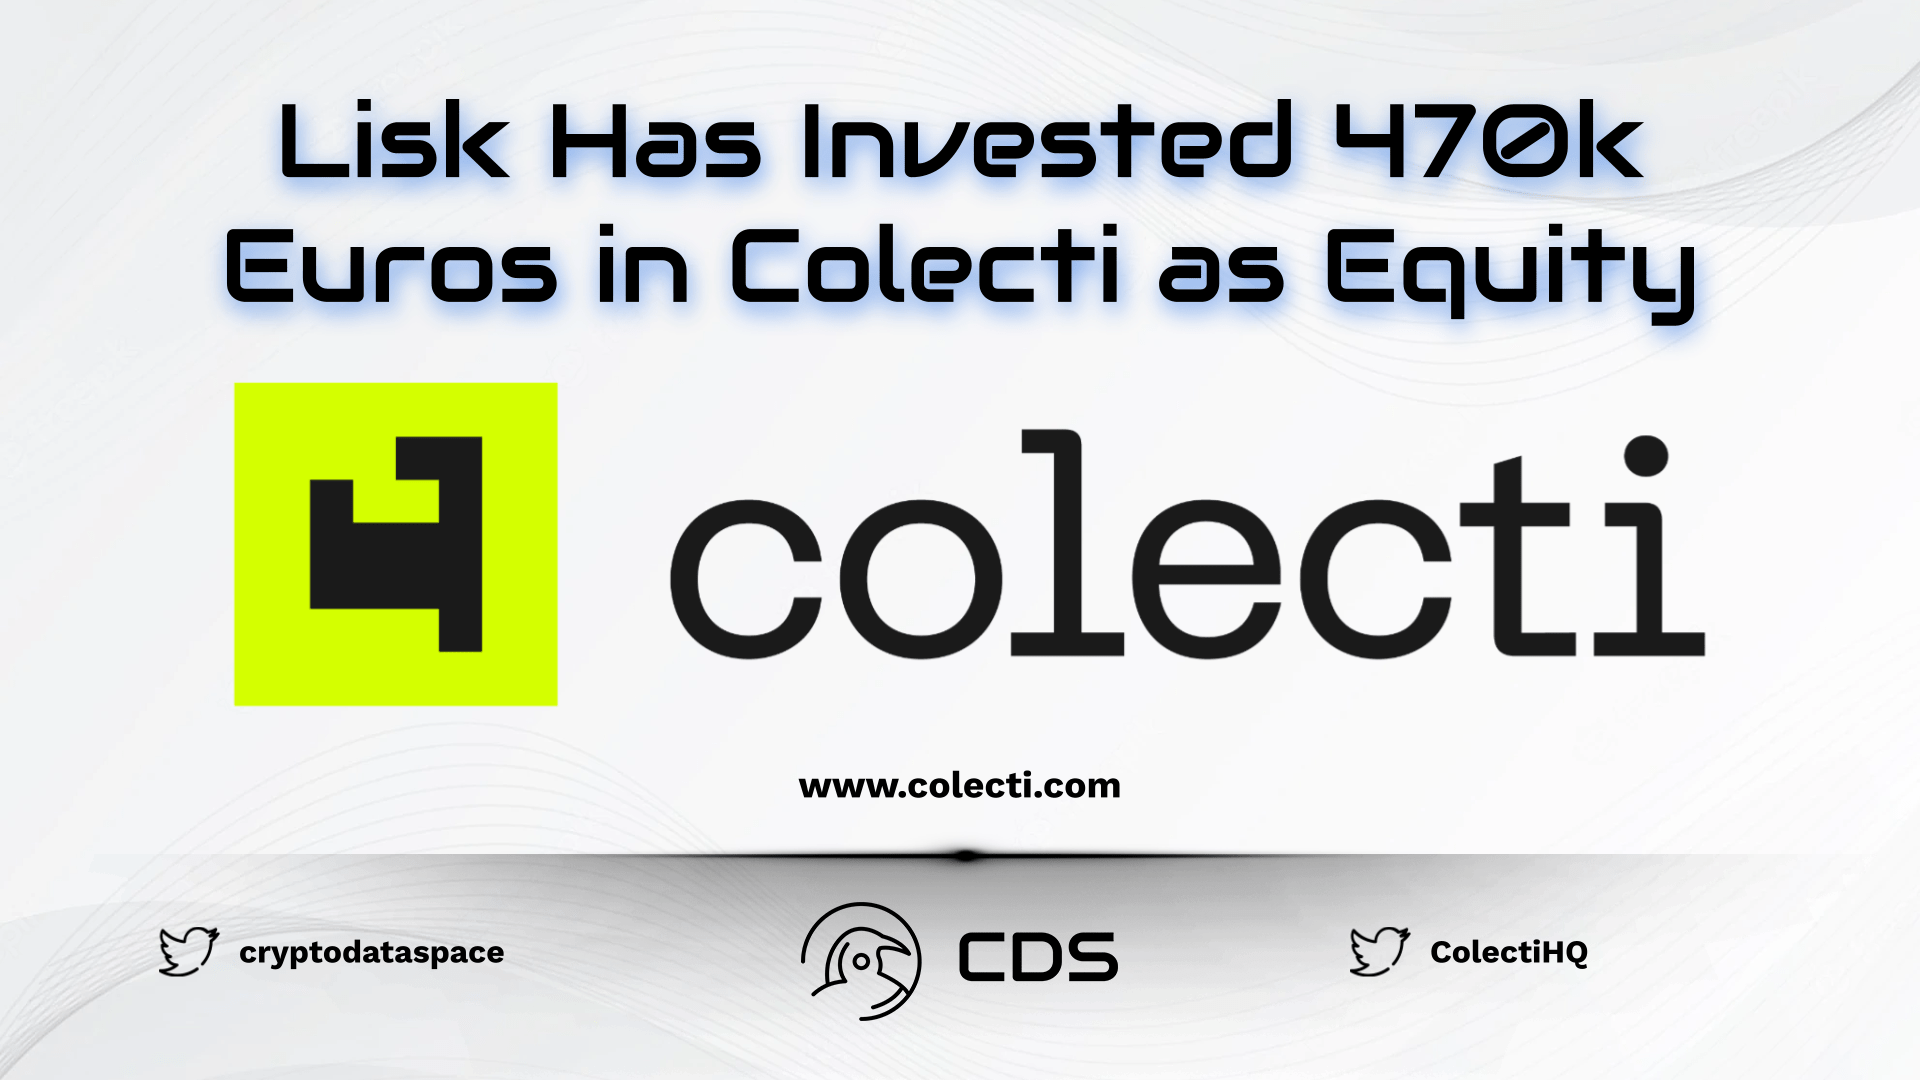 Lisk Has Invested 470k Euros in Colecti as Equity